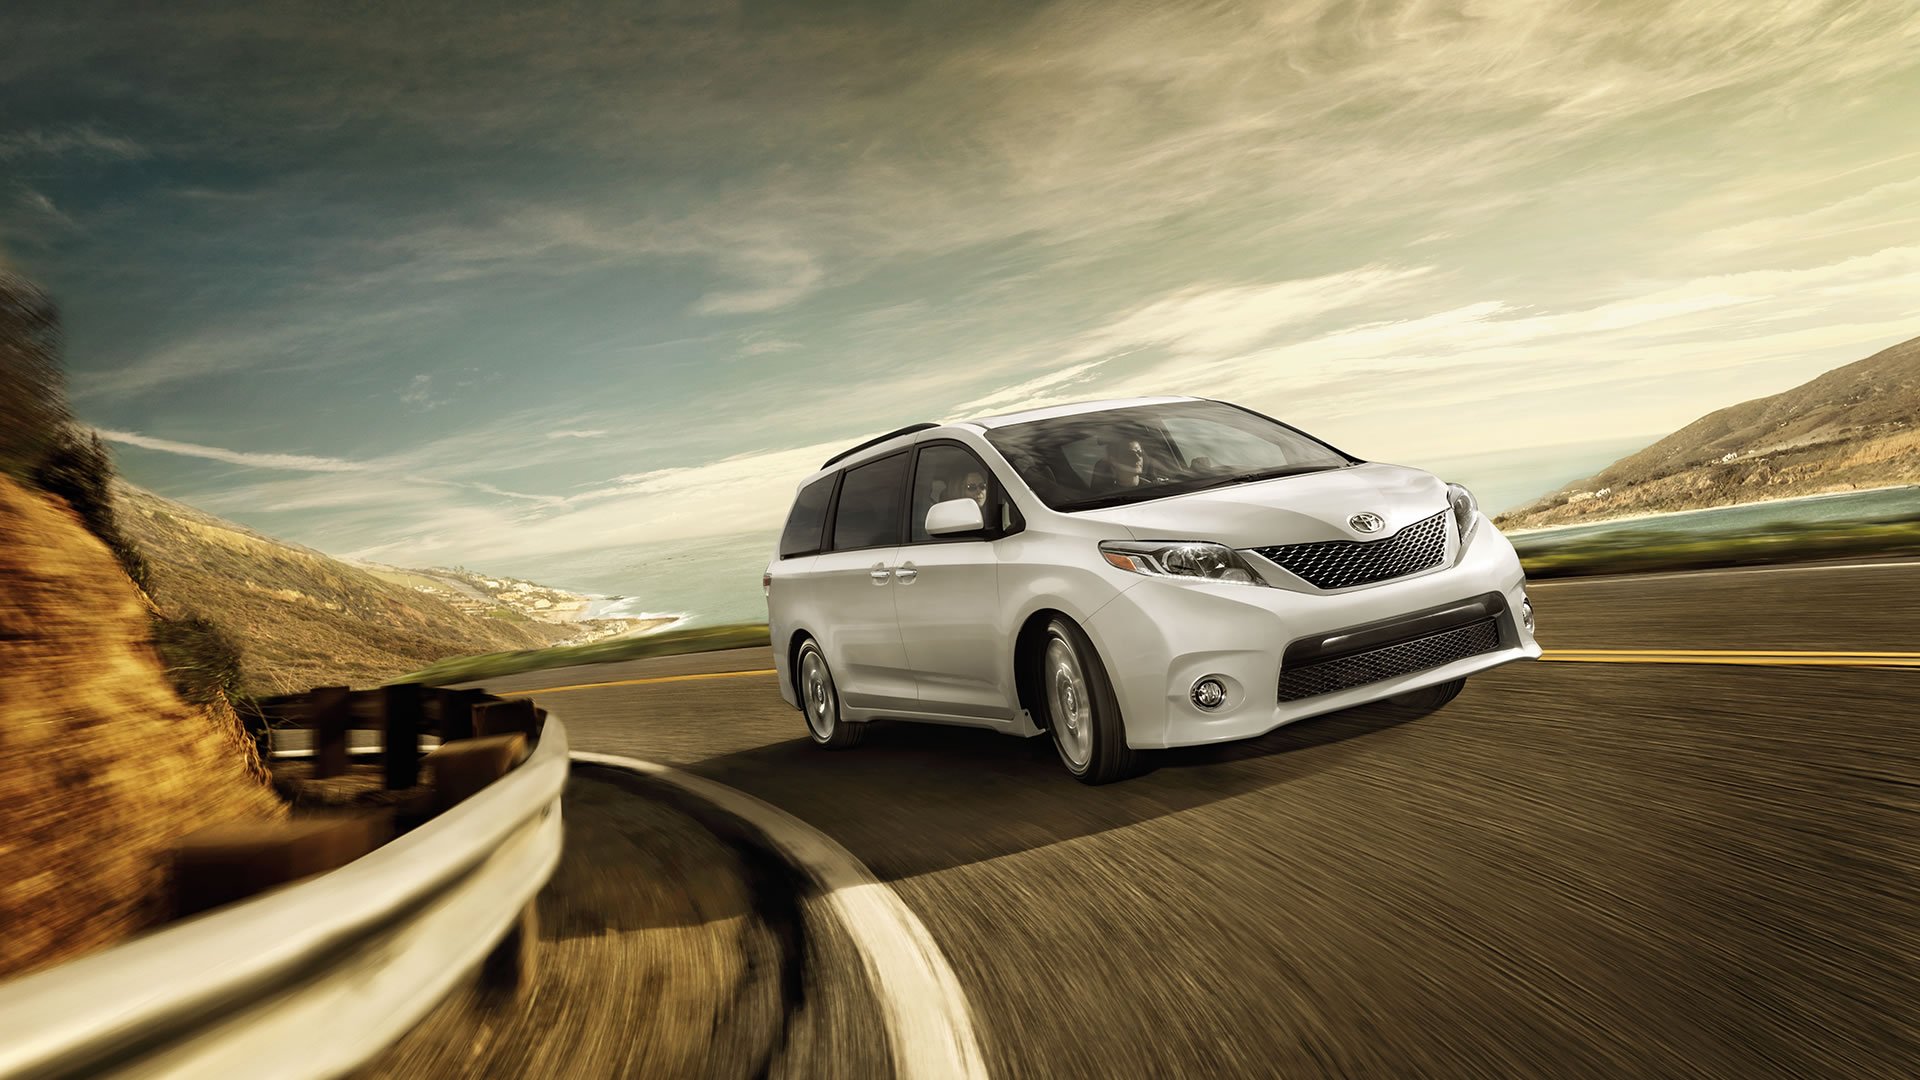 A Look At The Bold And Family Ready 2017 Toyota Sienna Minivan